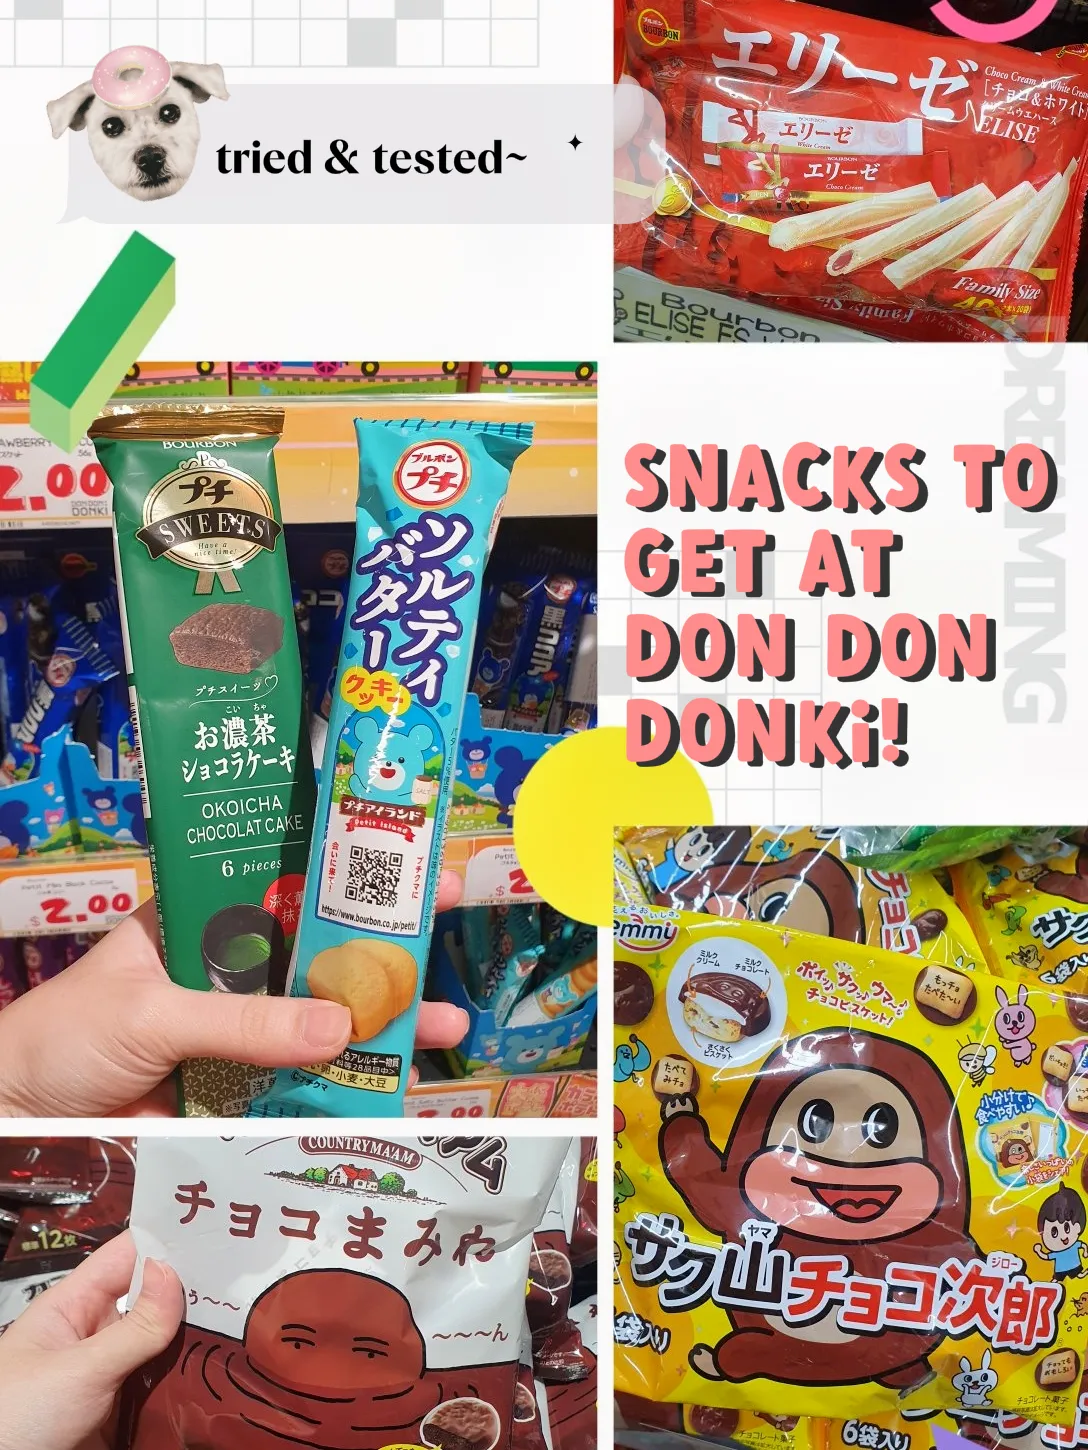 Yummy Don Don Donki snacks to try!🐧🍫's images